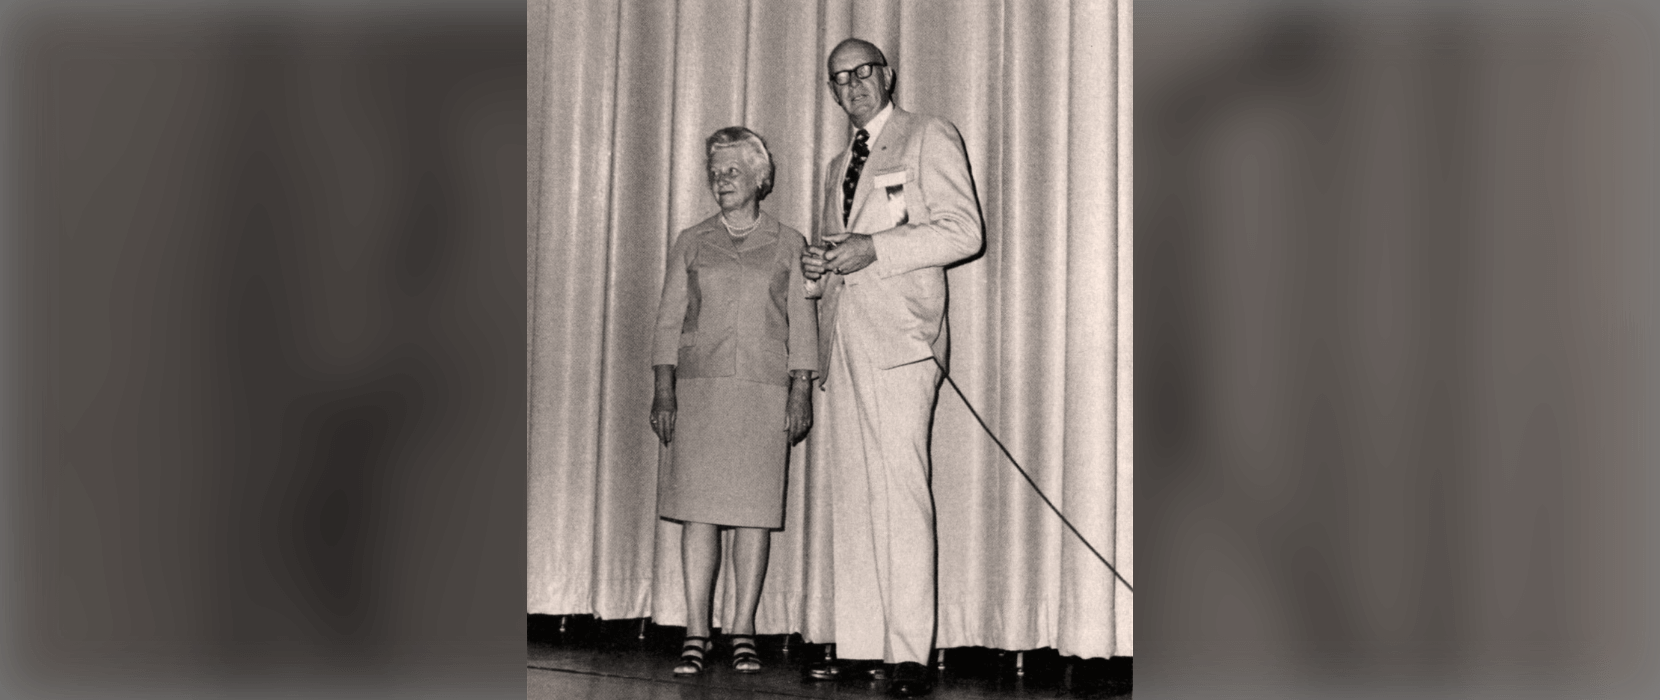 Black and white photo of a woman and man standing on a stage